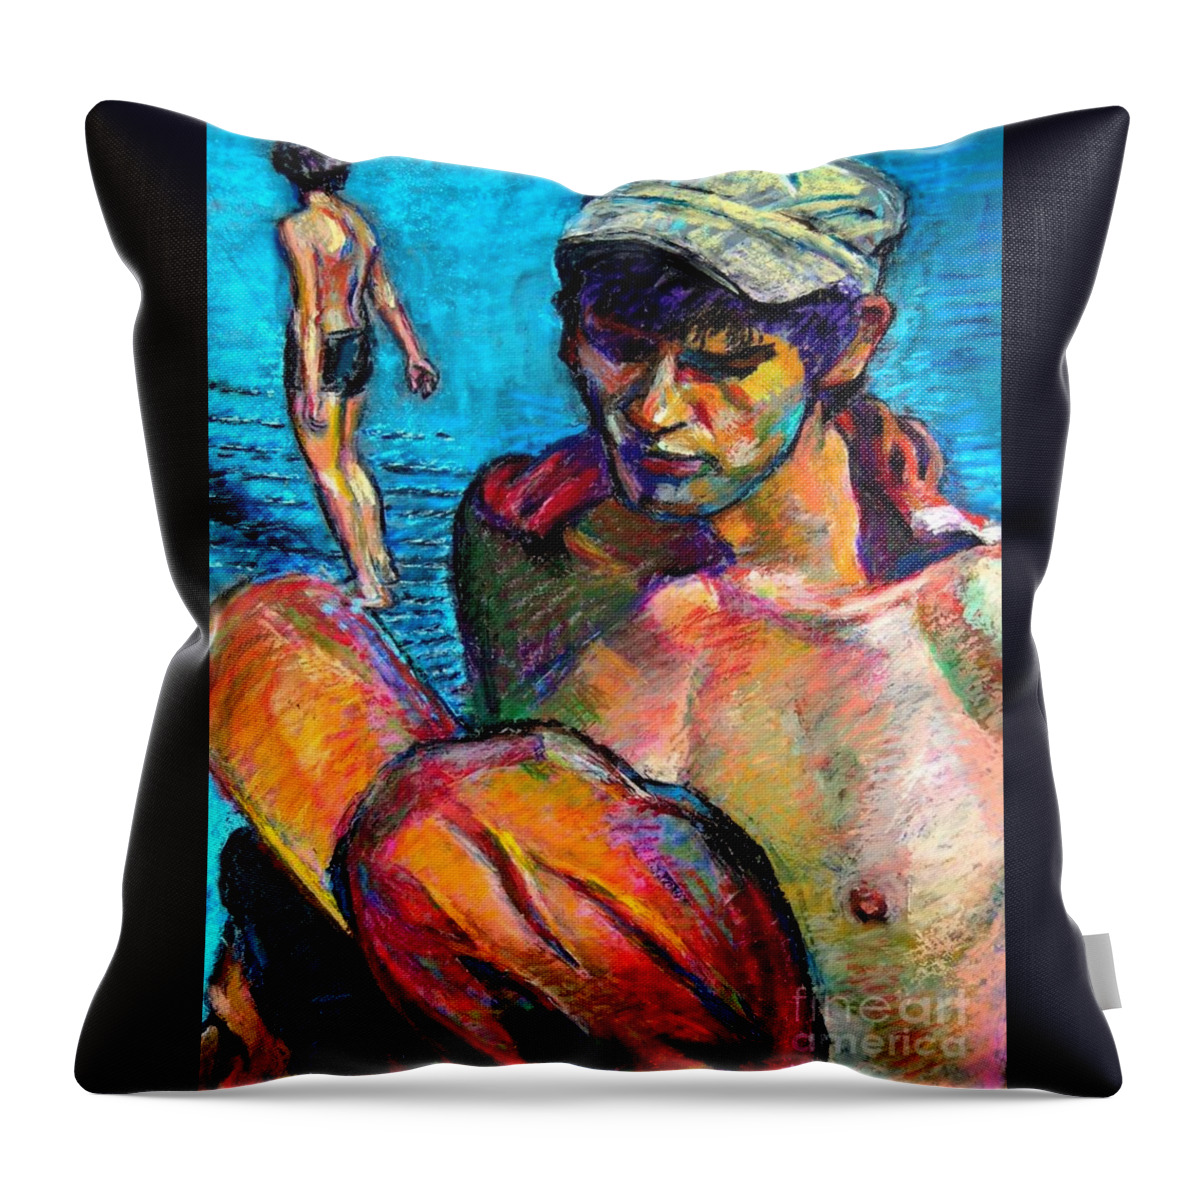 Boys Throw Pillow featuring the drawing Two Boys by Stan Esson